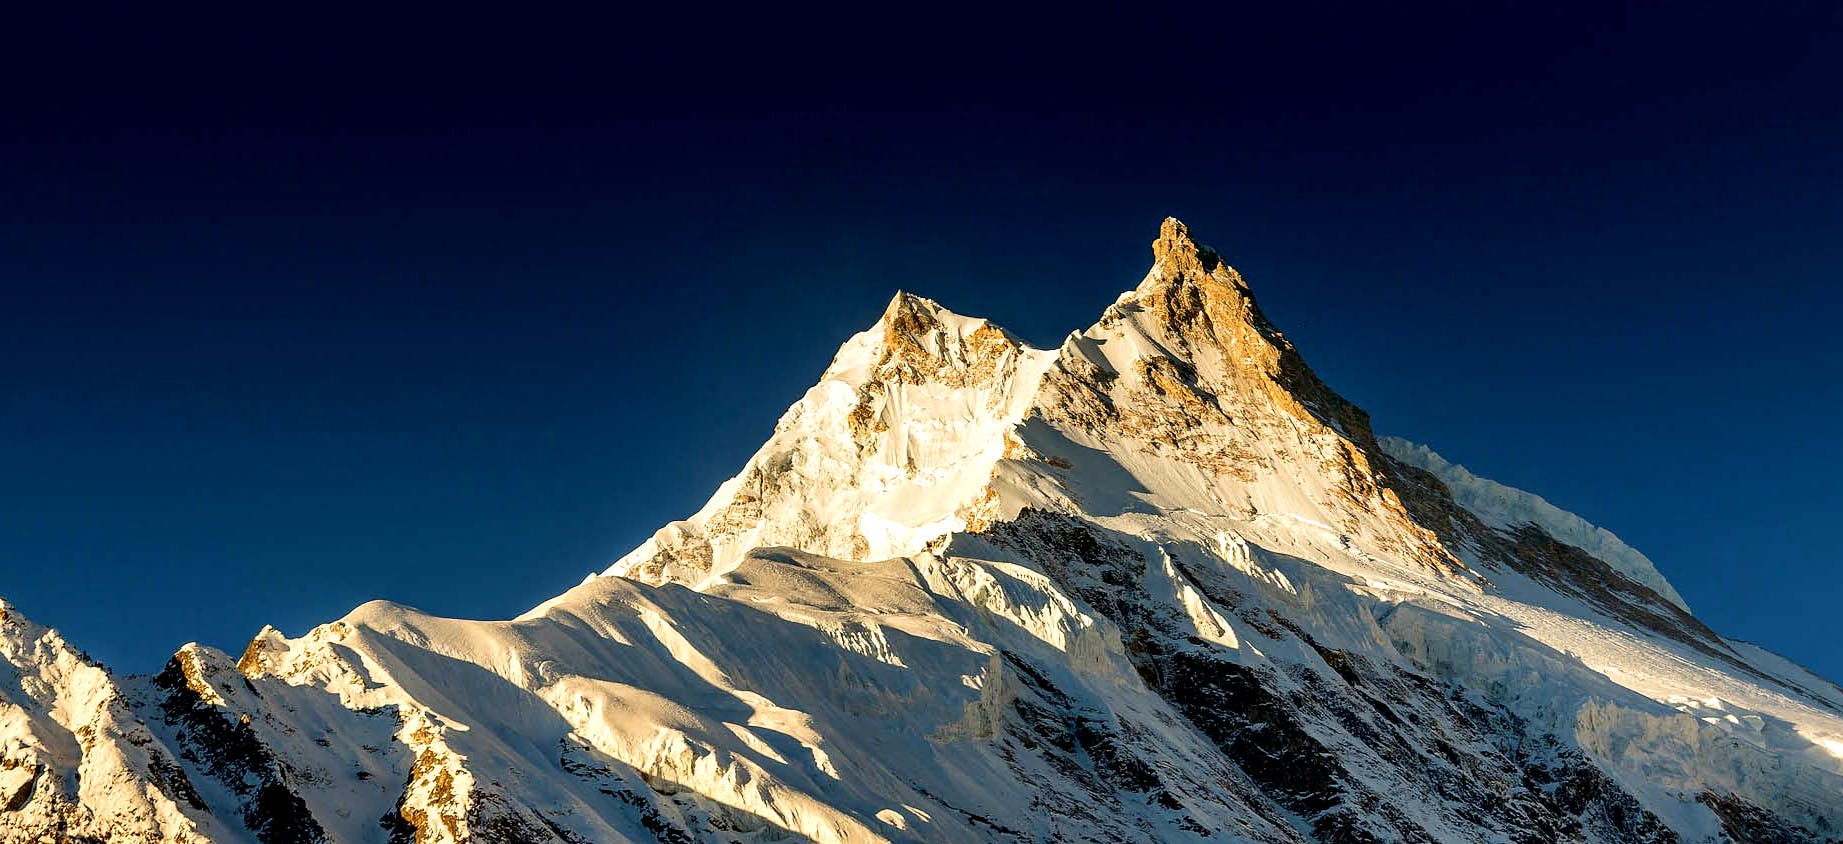 First-Timer's Guide to Mountain Climbing in Nepal